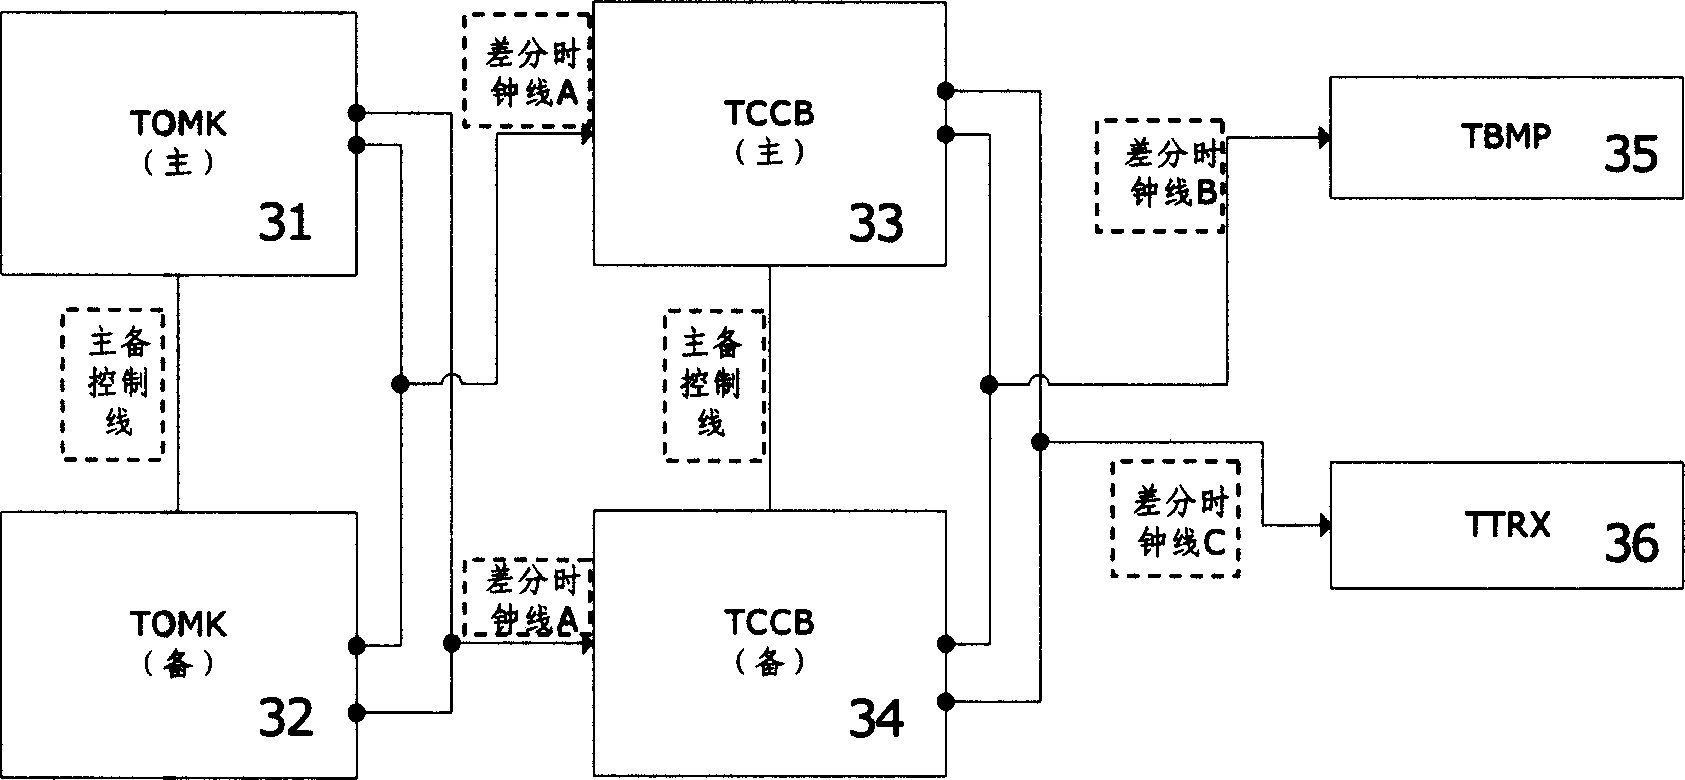 A base station equipment structure and backup method